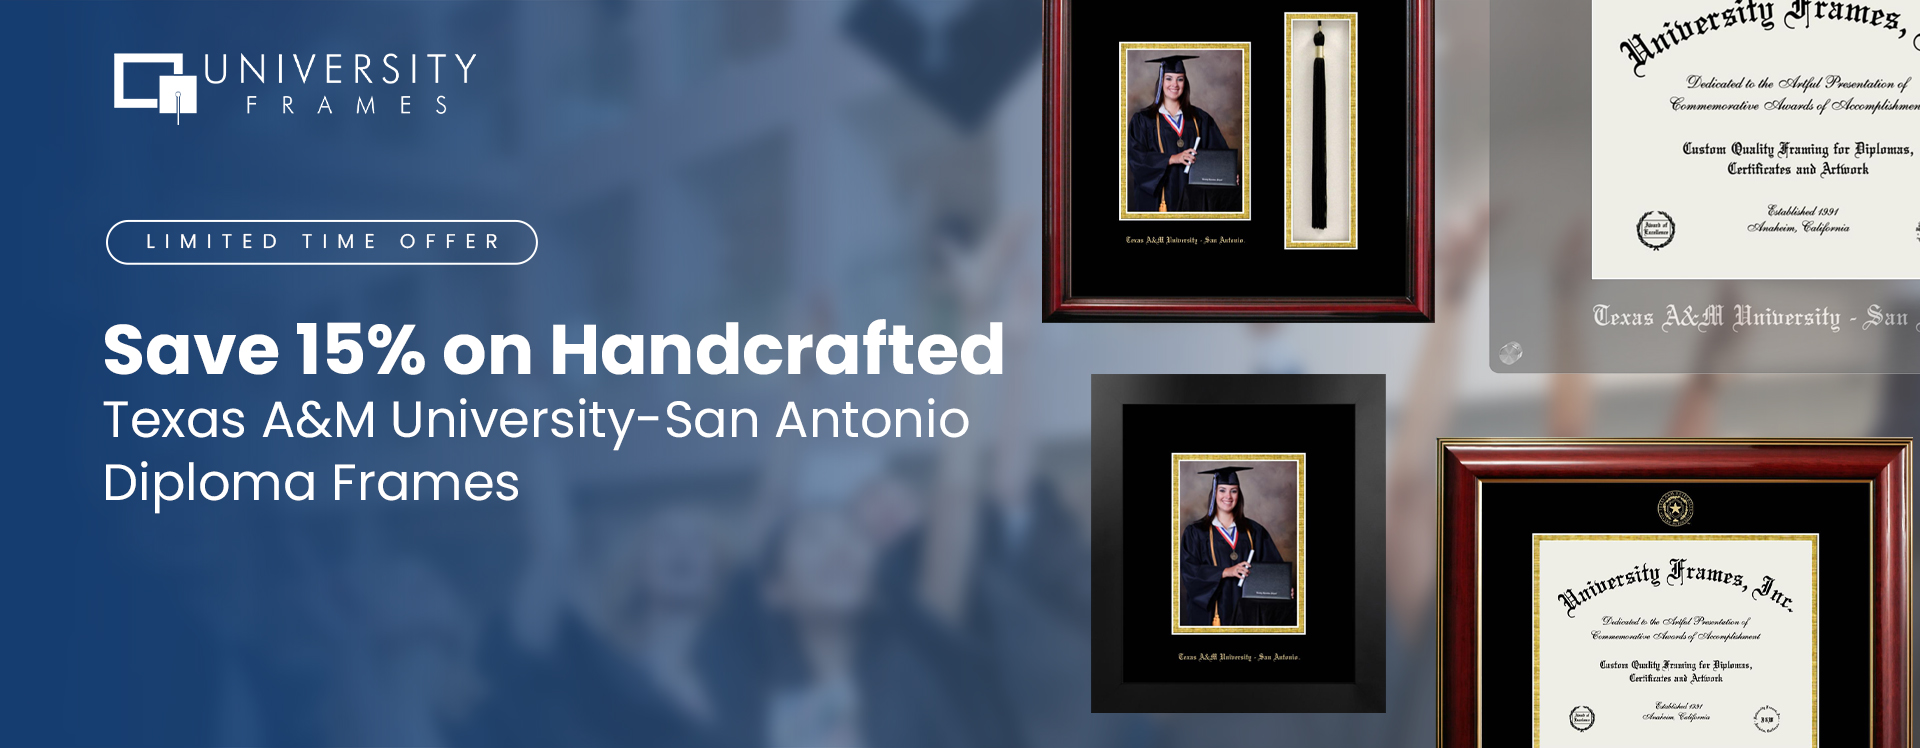 Limited Time Offer - Save 15% on Handcrafted Texas A&M University-San Antonio Diploma Frames